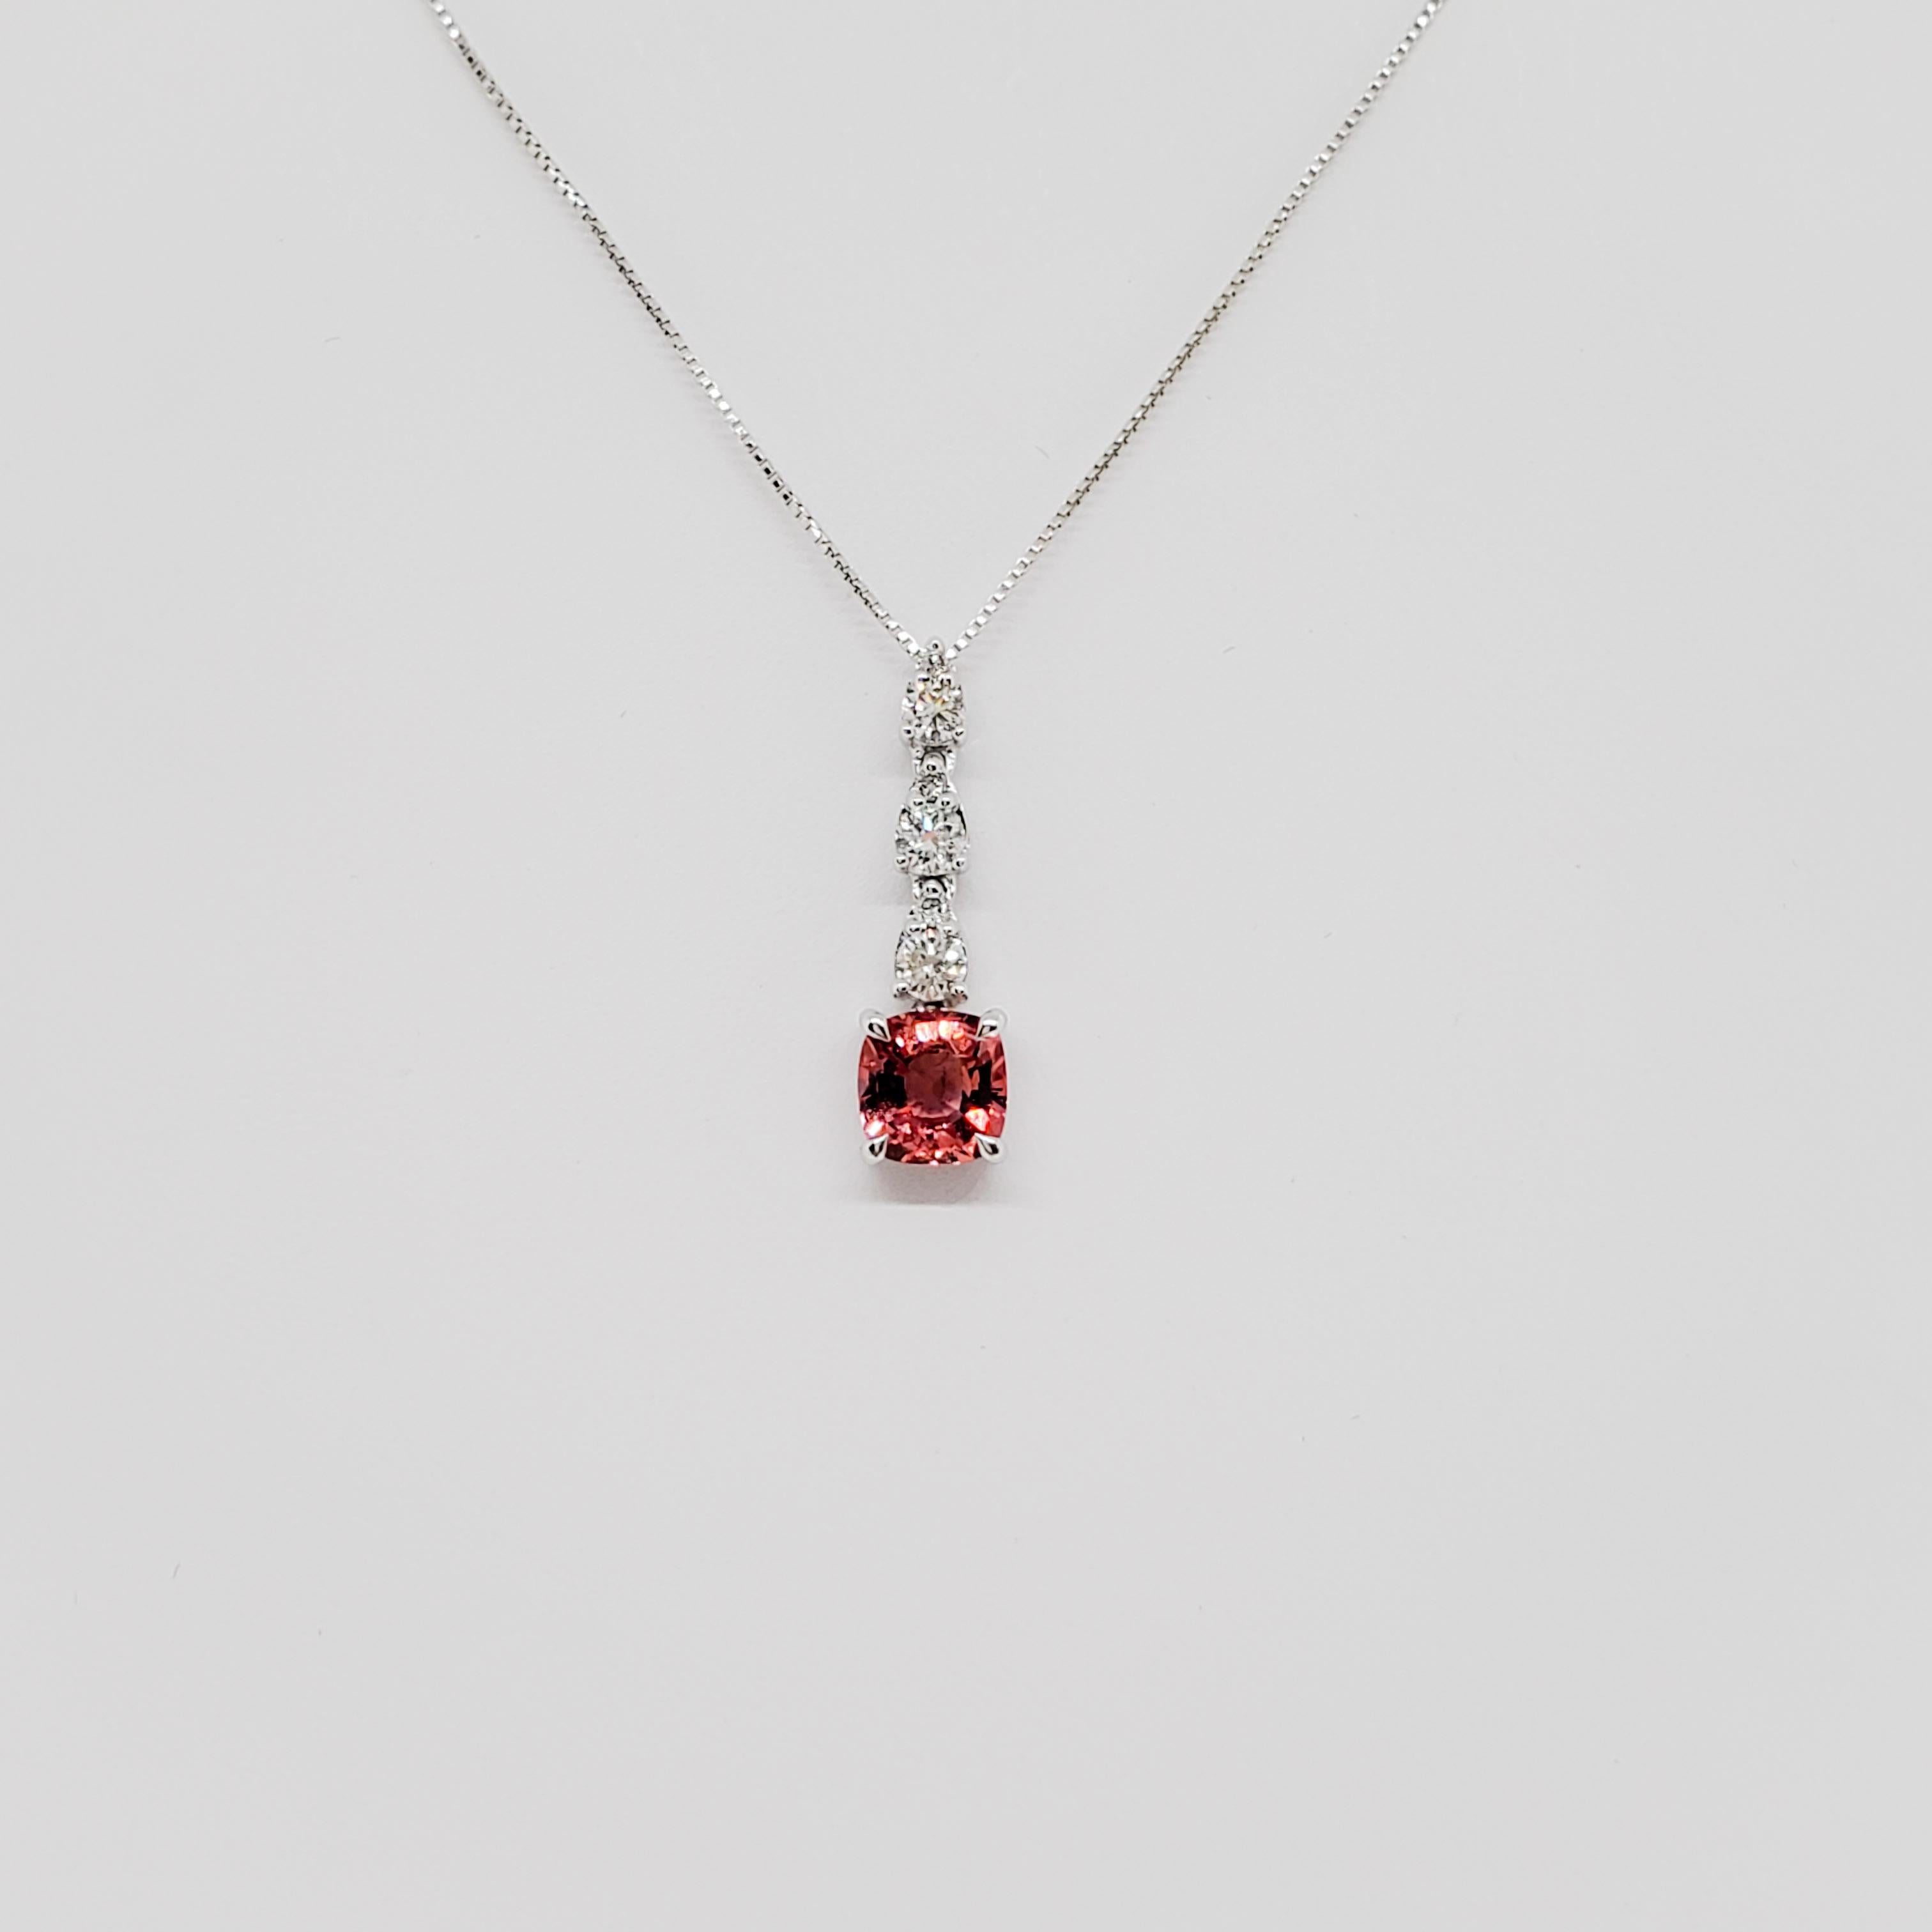 Gorgeous 1.14 ct. padparadscha cushion shape with good quality white diamond rounds in a handmade 18k white gold necklace.  Comes with GRS Lab report.